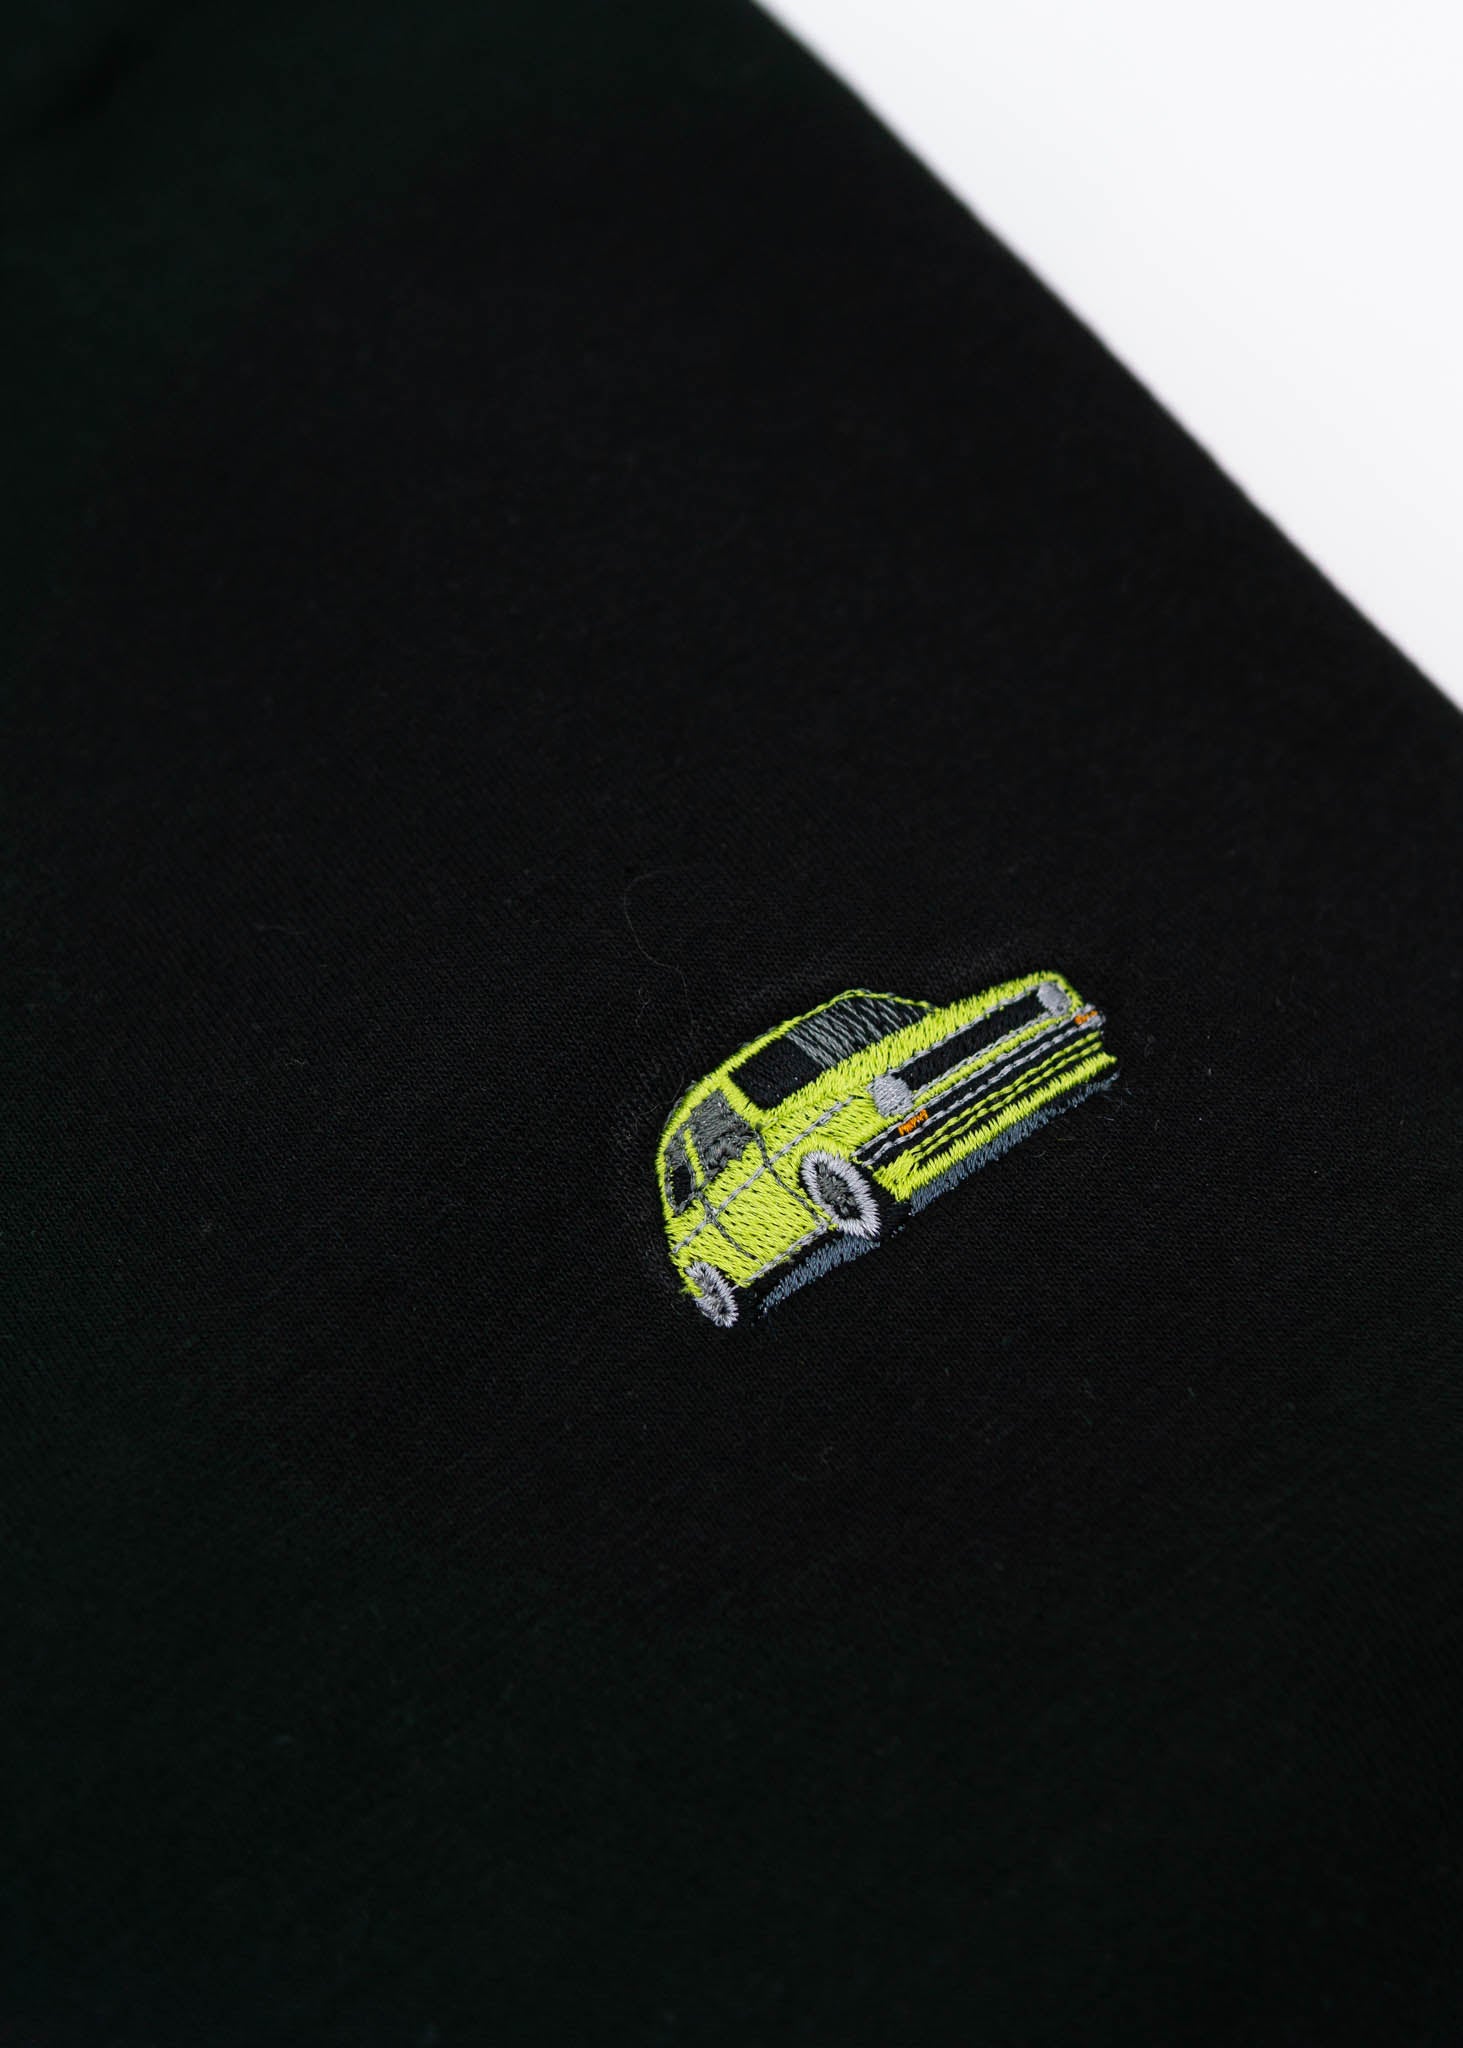 A black VW Volkswagen crewneck sweater for men. Photo is a close up of the sweater with an embroidered modified green VW Mk1 Golf. Fabric is 100% cotton and high quality and fits to size. The style is long sleeve, crew neck, and embroidery on left chest.